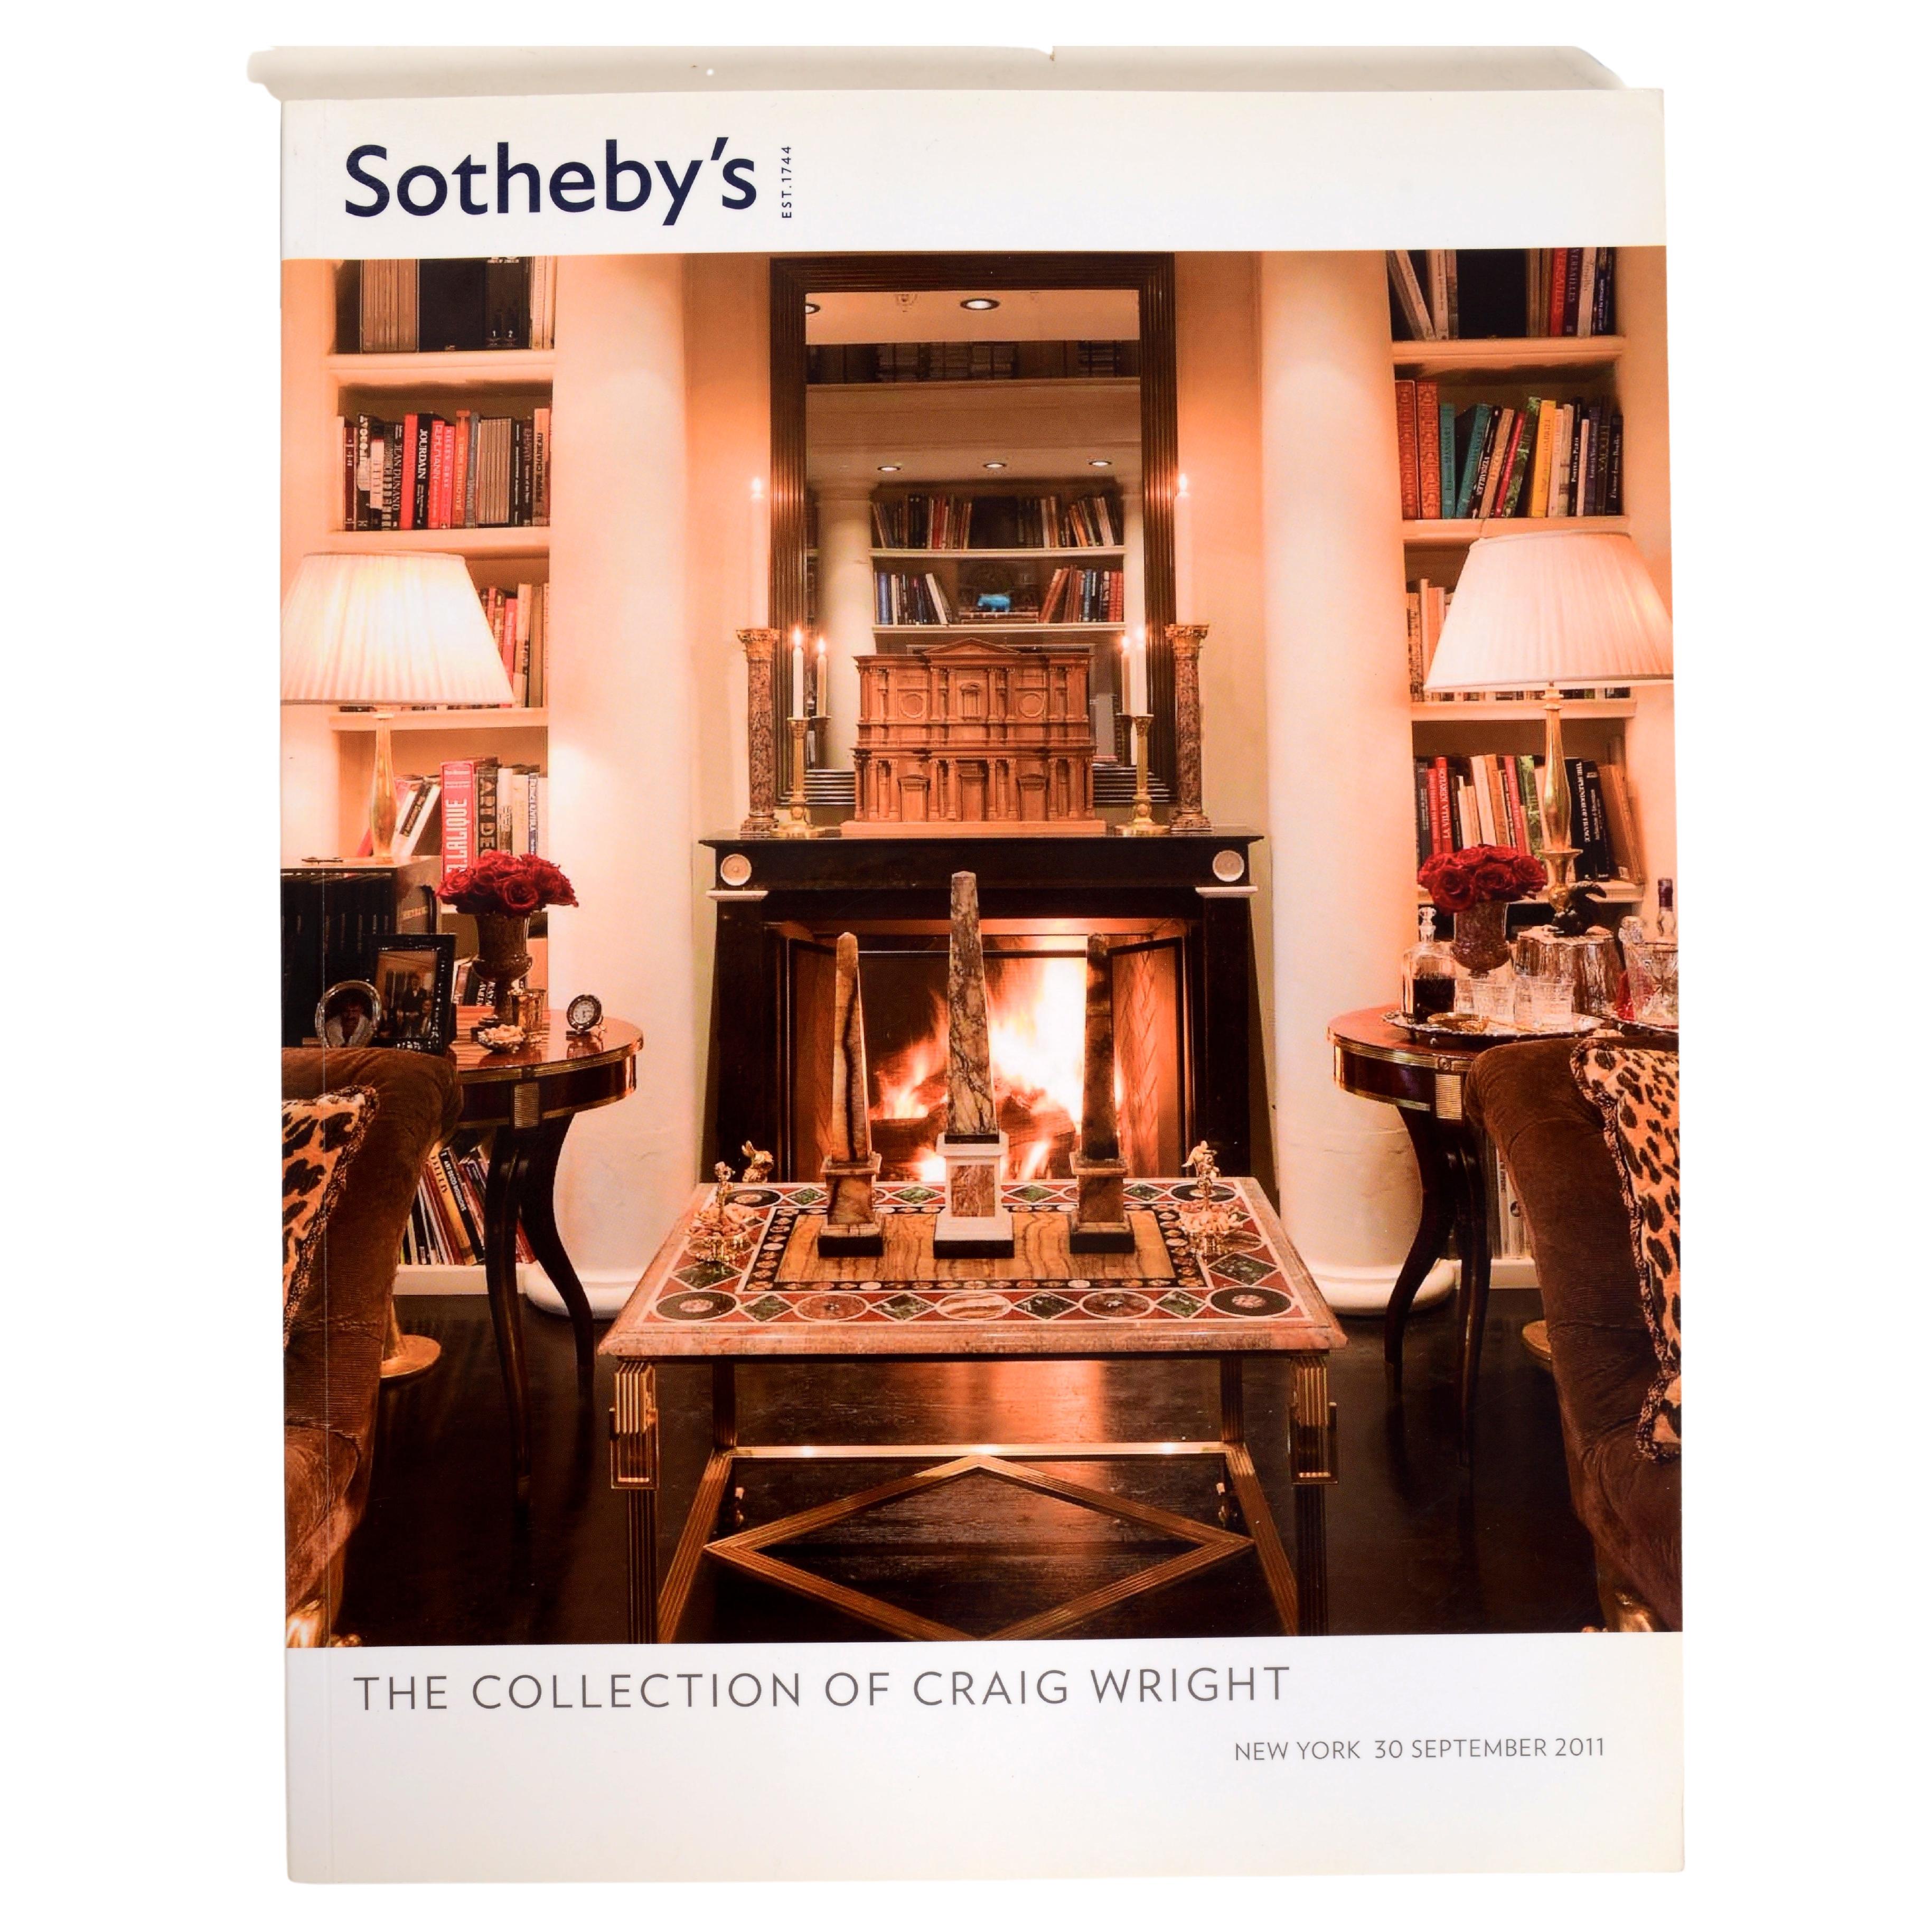 Sotheby's, The Collection of Craig Wright, New Yorker Auktionskatalog, September 2011